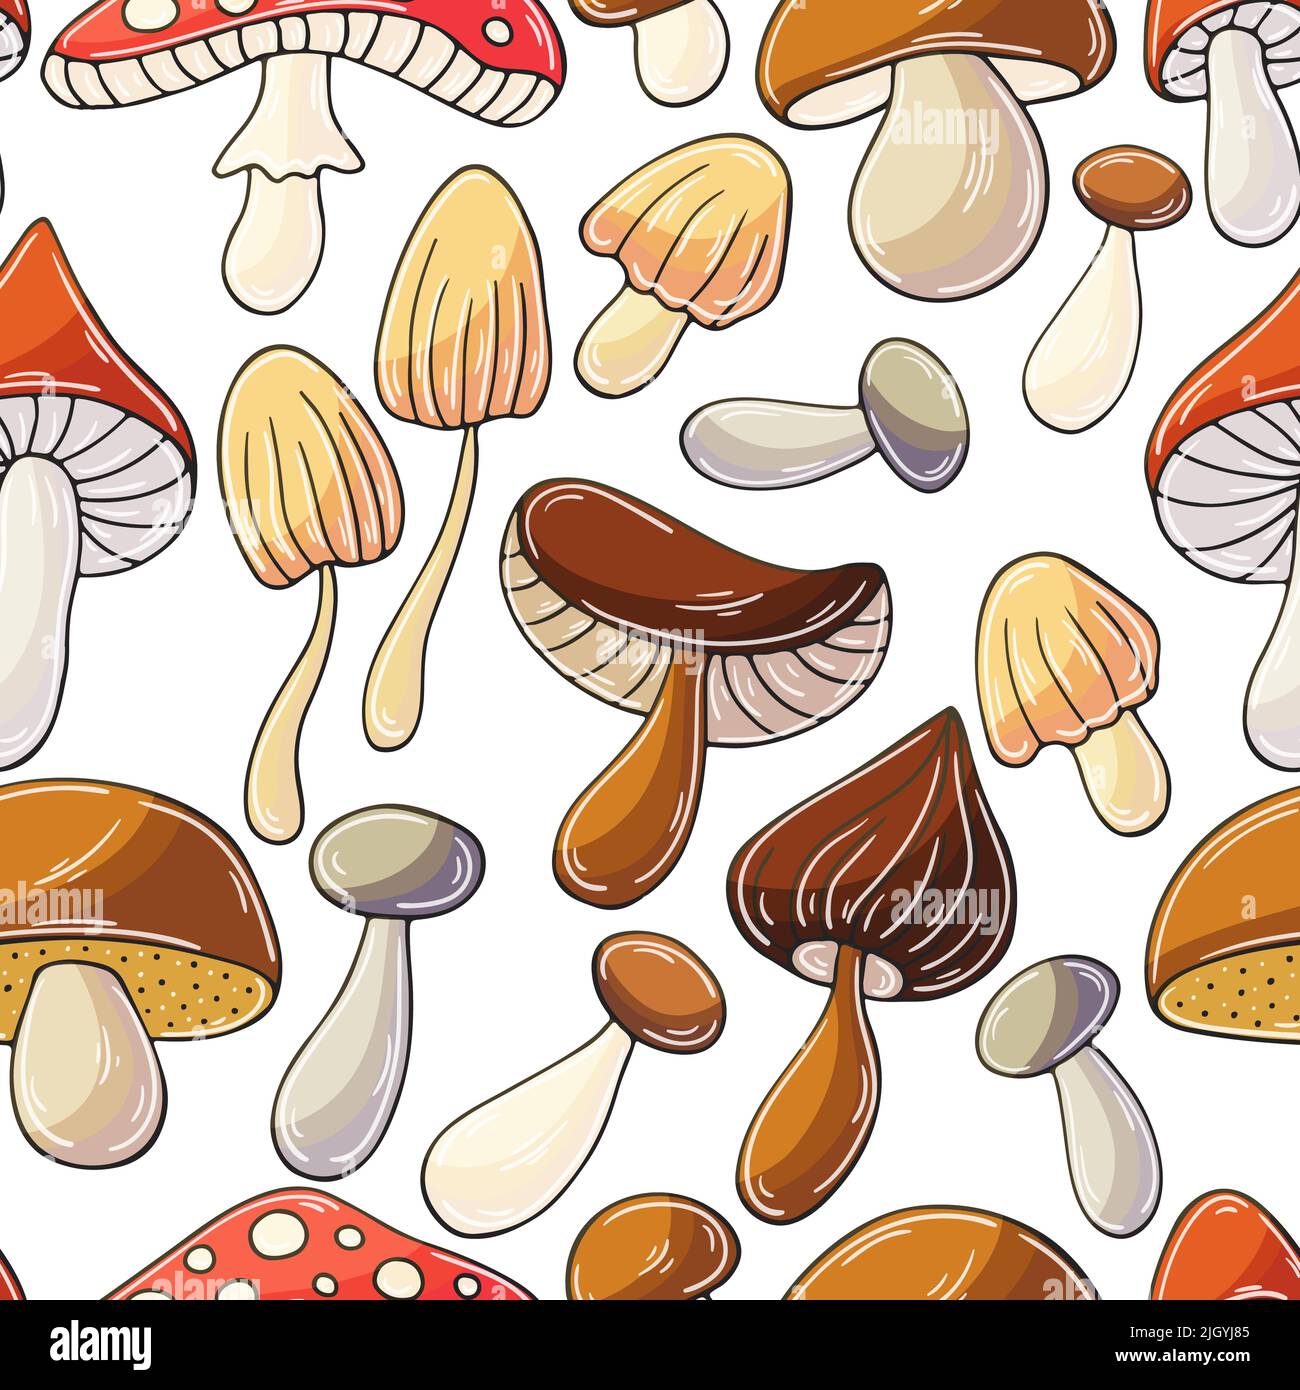 Mushroom autumn mood. Illustration in hand draw style. Seamless pattern with forest mushrooms. Can be used for fabric, packaging, wrapping paper and e Stock Vector